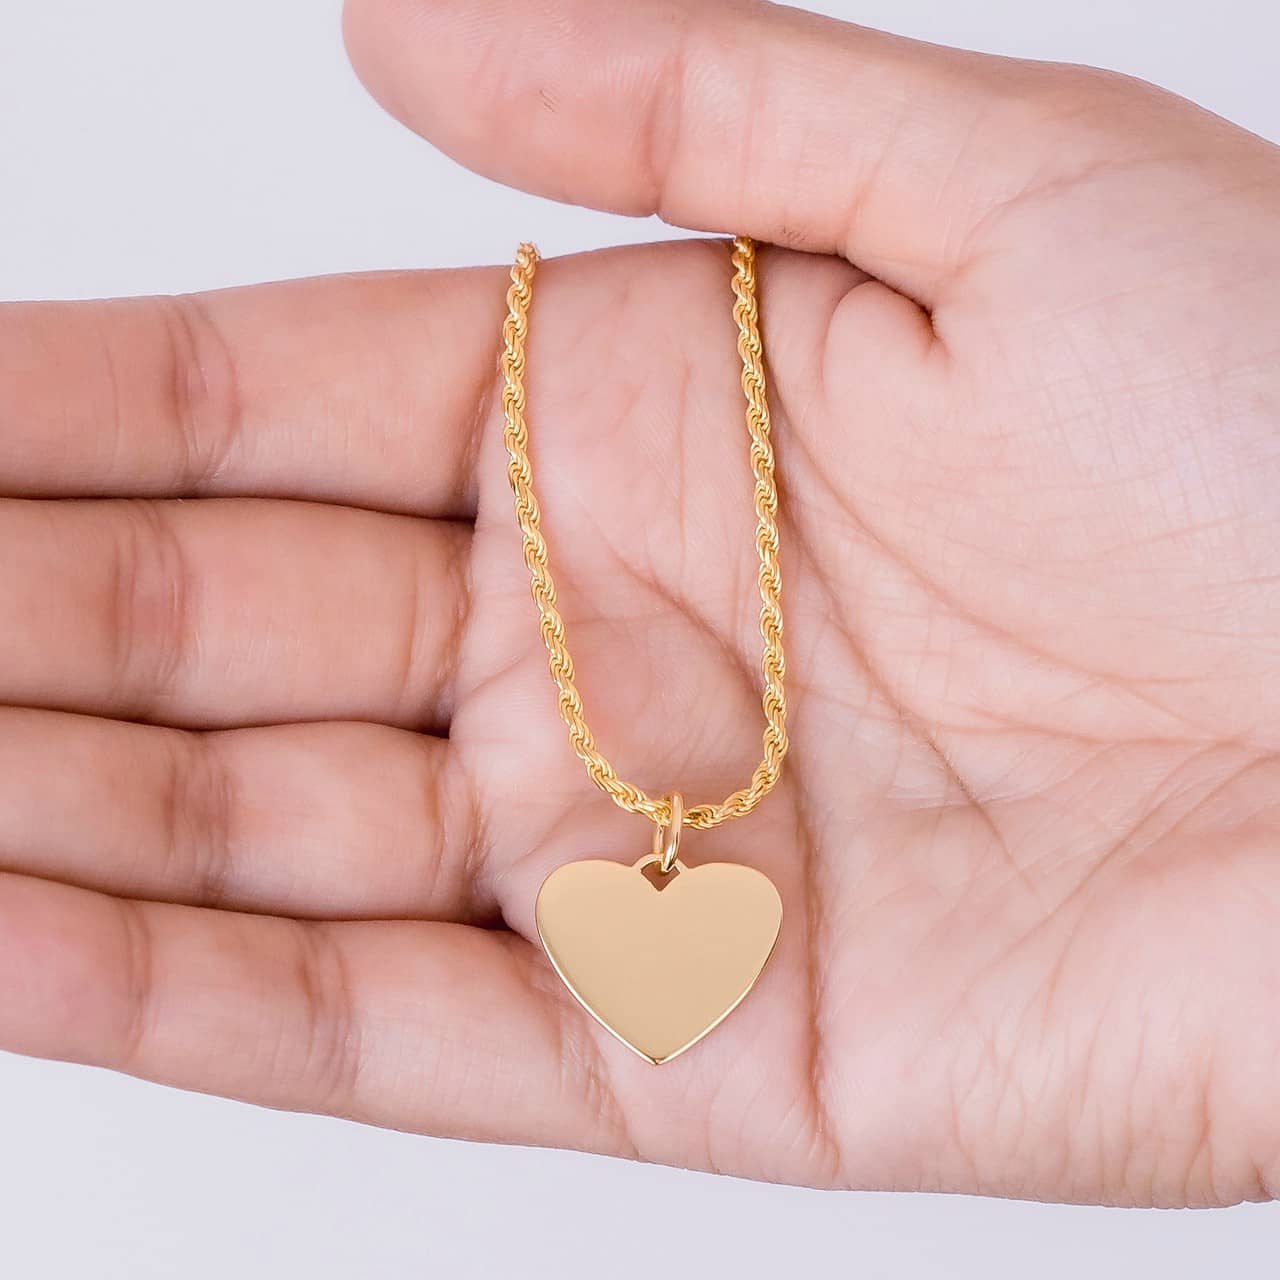 engraved jewellery - yellow gold rope bracelet with heart that can be engraved